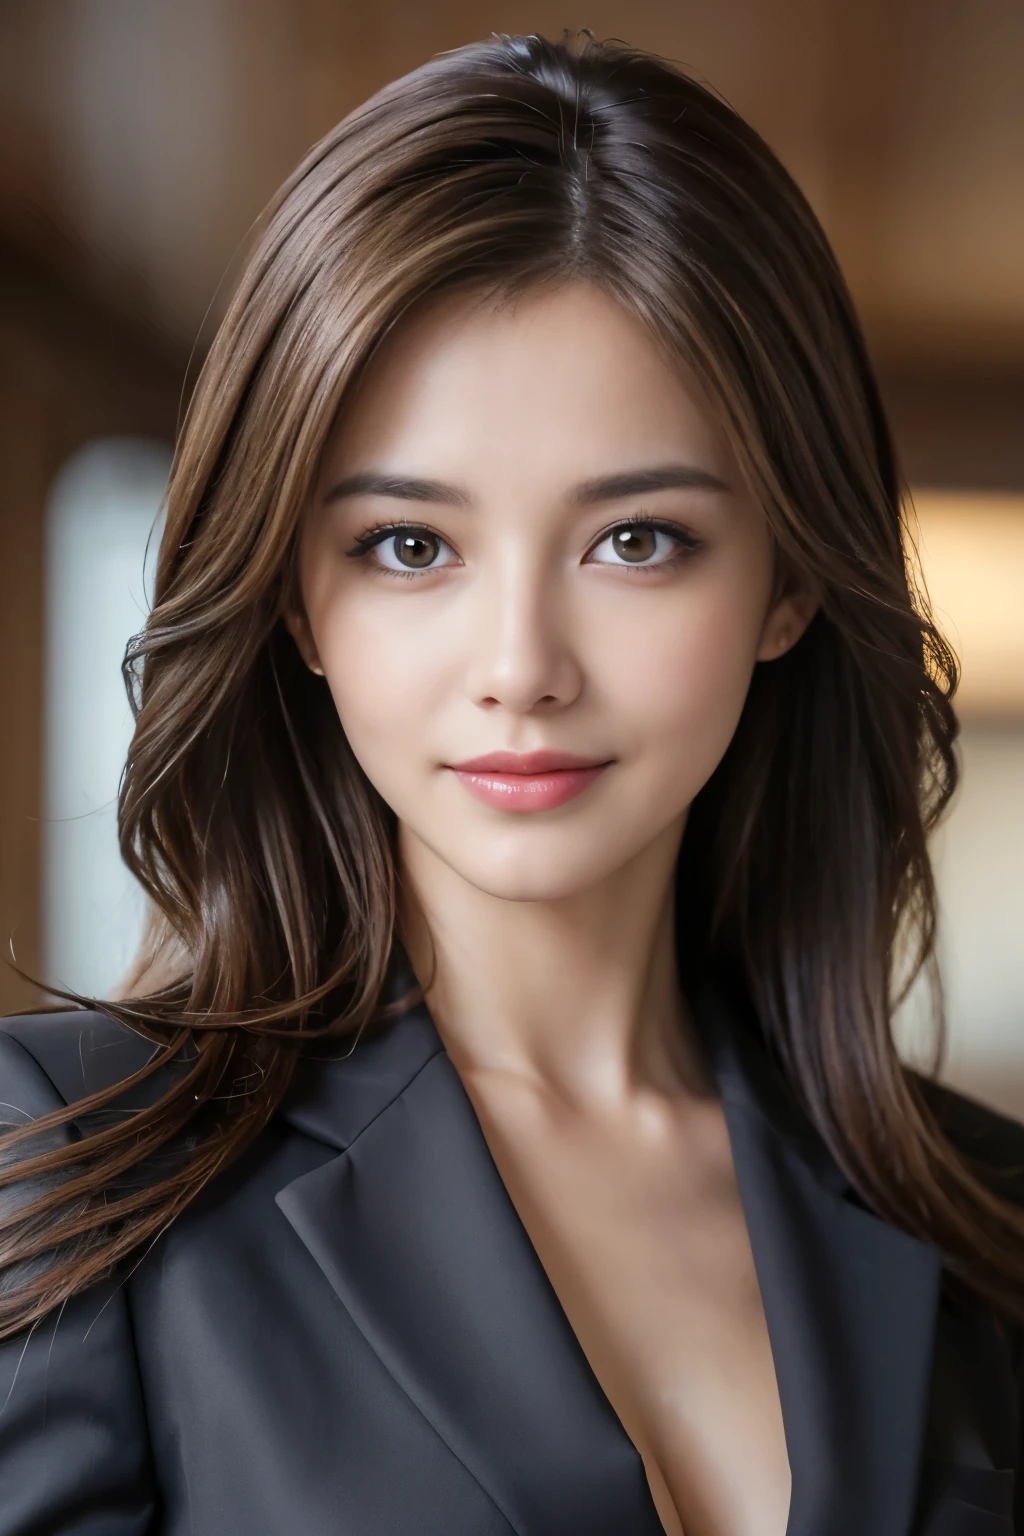 table top, highest quality, realistic, Super detailed, finely, High resolution, 8k wallpaper, 1 beautiful woman,, light brown messy hair, wearing a business suit, sharp focus, perfect dynamic composition, beautiful and detailed eyes, thin hair, Detailed realistic skin texture, smile, close-up portrait, model body shape